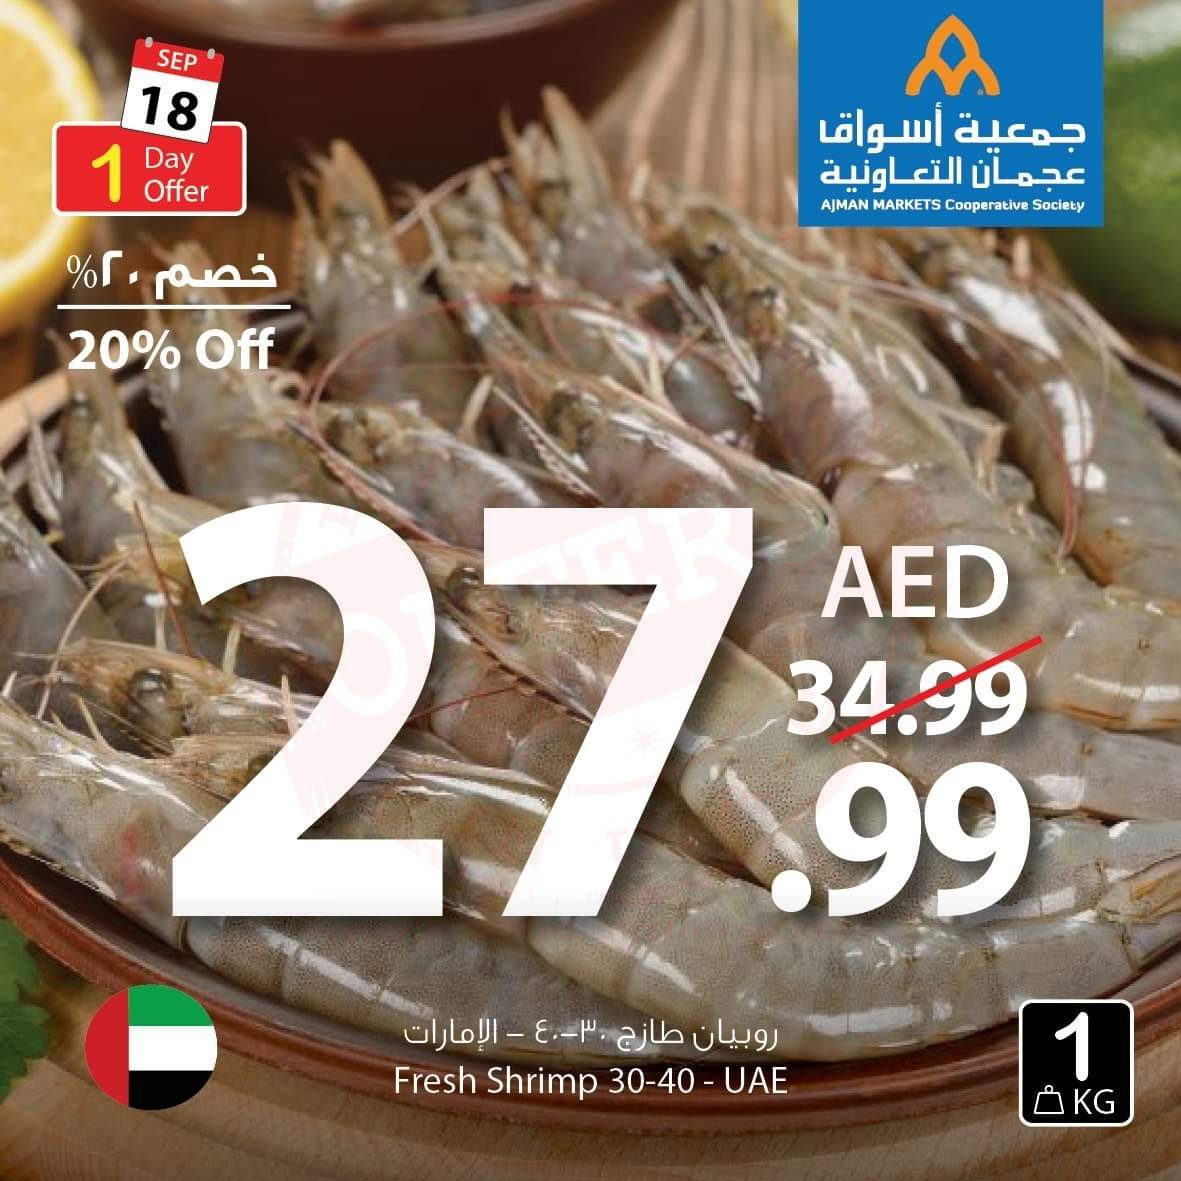 FB IMG 1568800303678 1 Amazing "One Day" Offer!! Ajman Coop